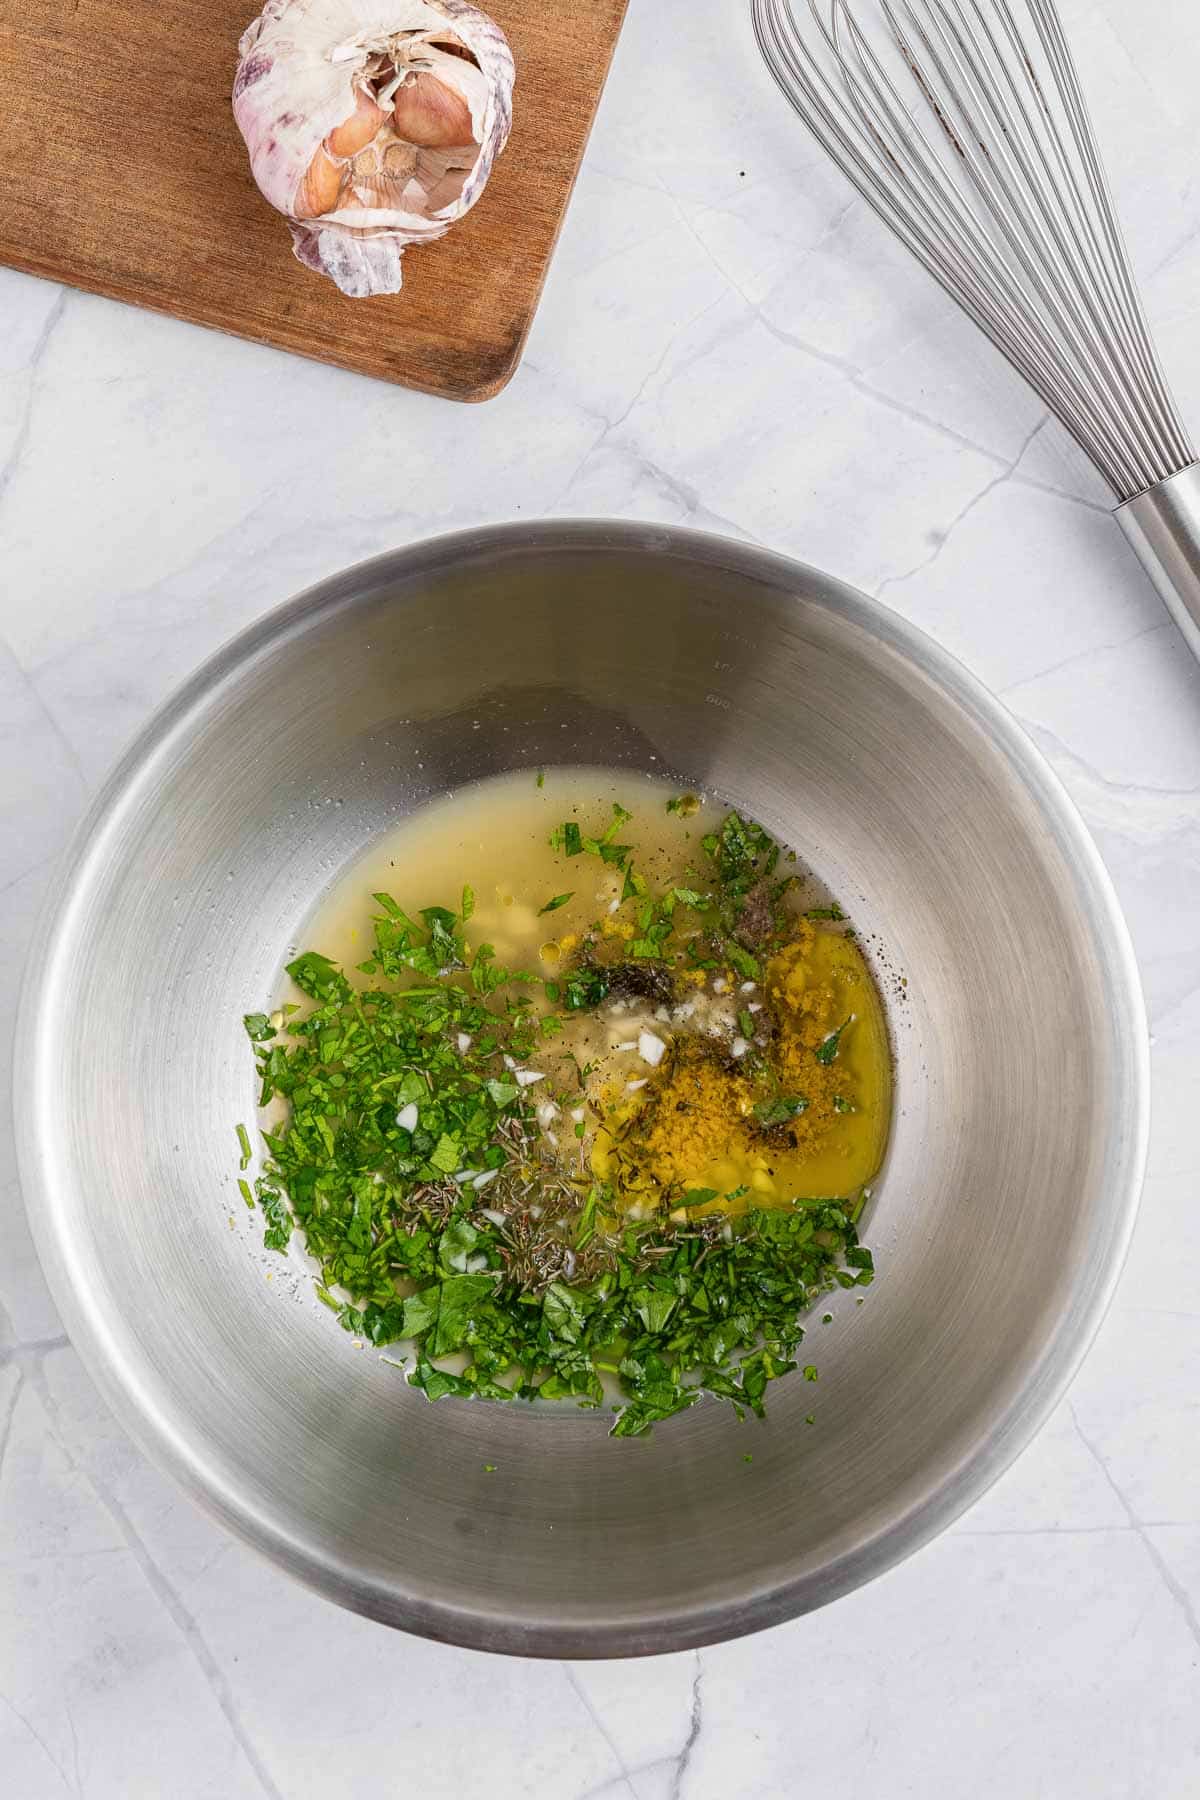 A bowl with garlic, herbs, and a whisk.